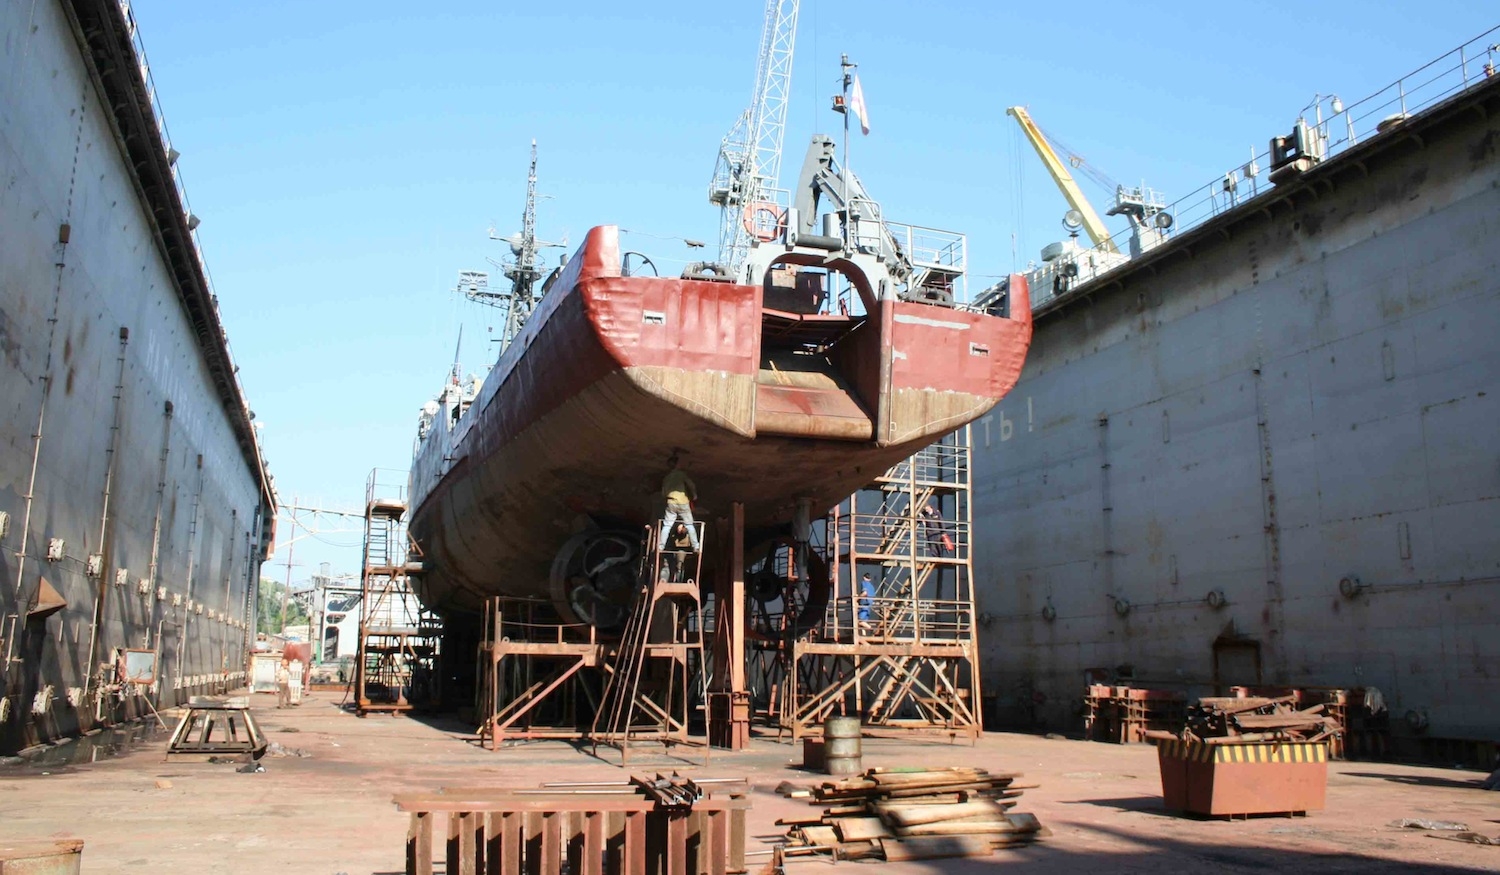 FEATURE: A new era of commercial shipbuilding on the way in Russia - Baird  Maritime